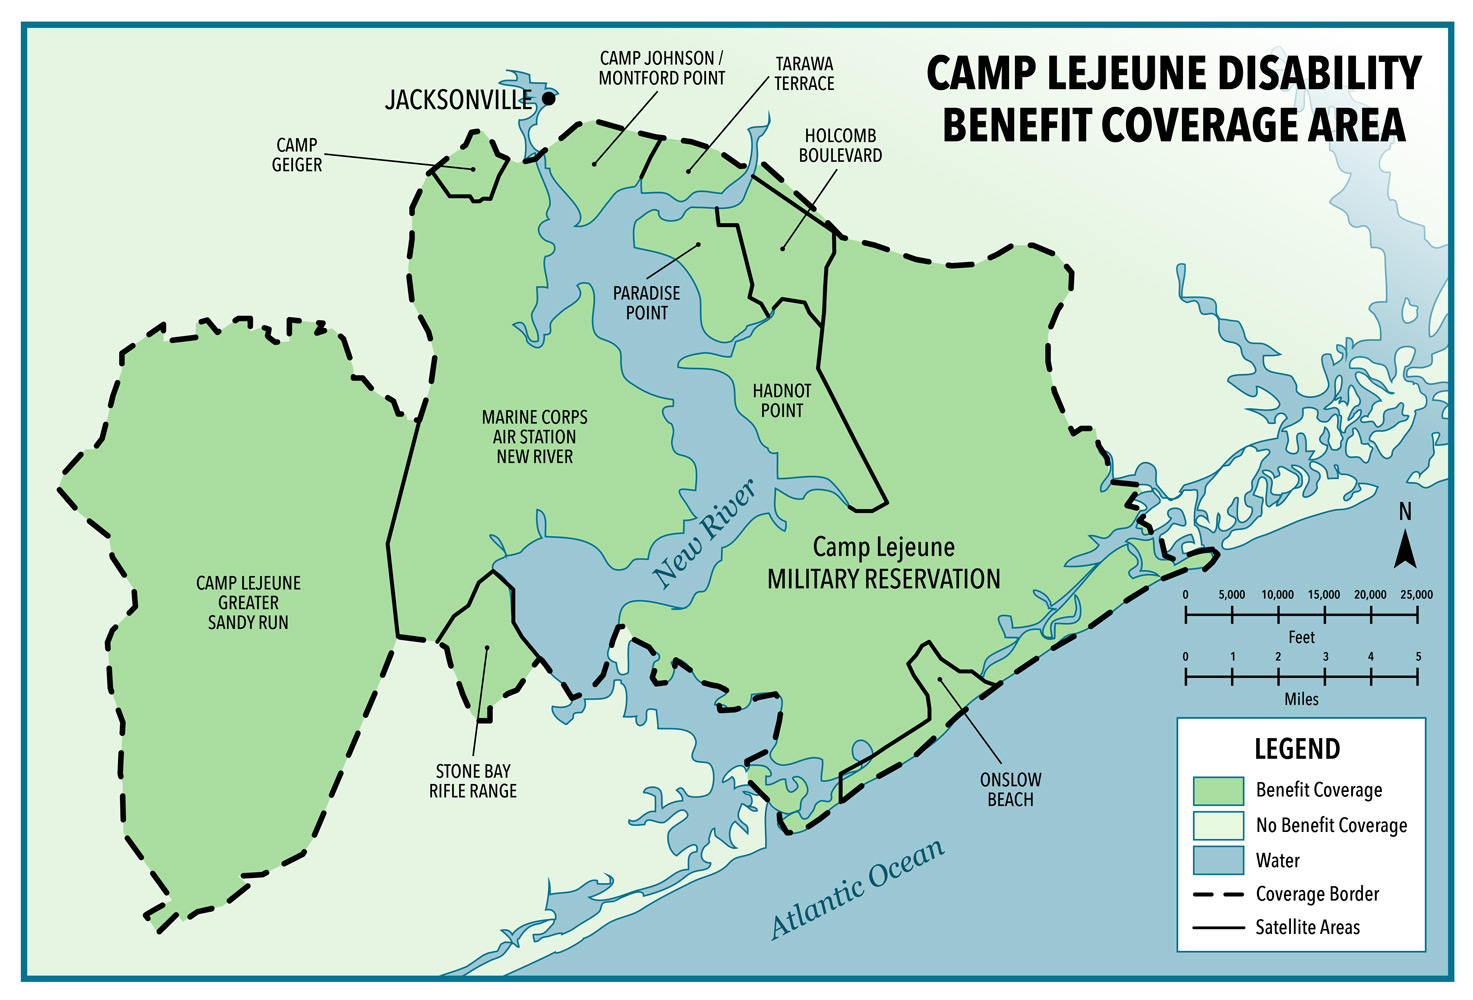 Camp Lejeune disability coverage area map which includes Greaster Sandy Run, Air Station New River, Stone Bay Rifle Range, Camp Geiger, Camp Johnson-Montford Point, Tarawa Terrace, Holcomb Boulevard, Paradise Point, Hadnot Point, and Onslow Beach